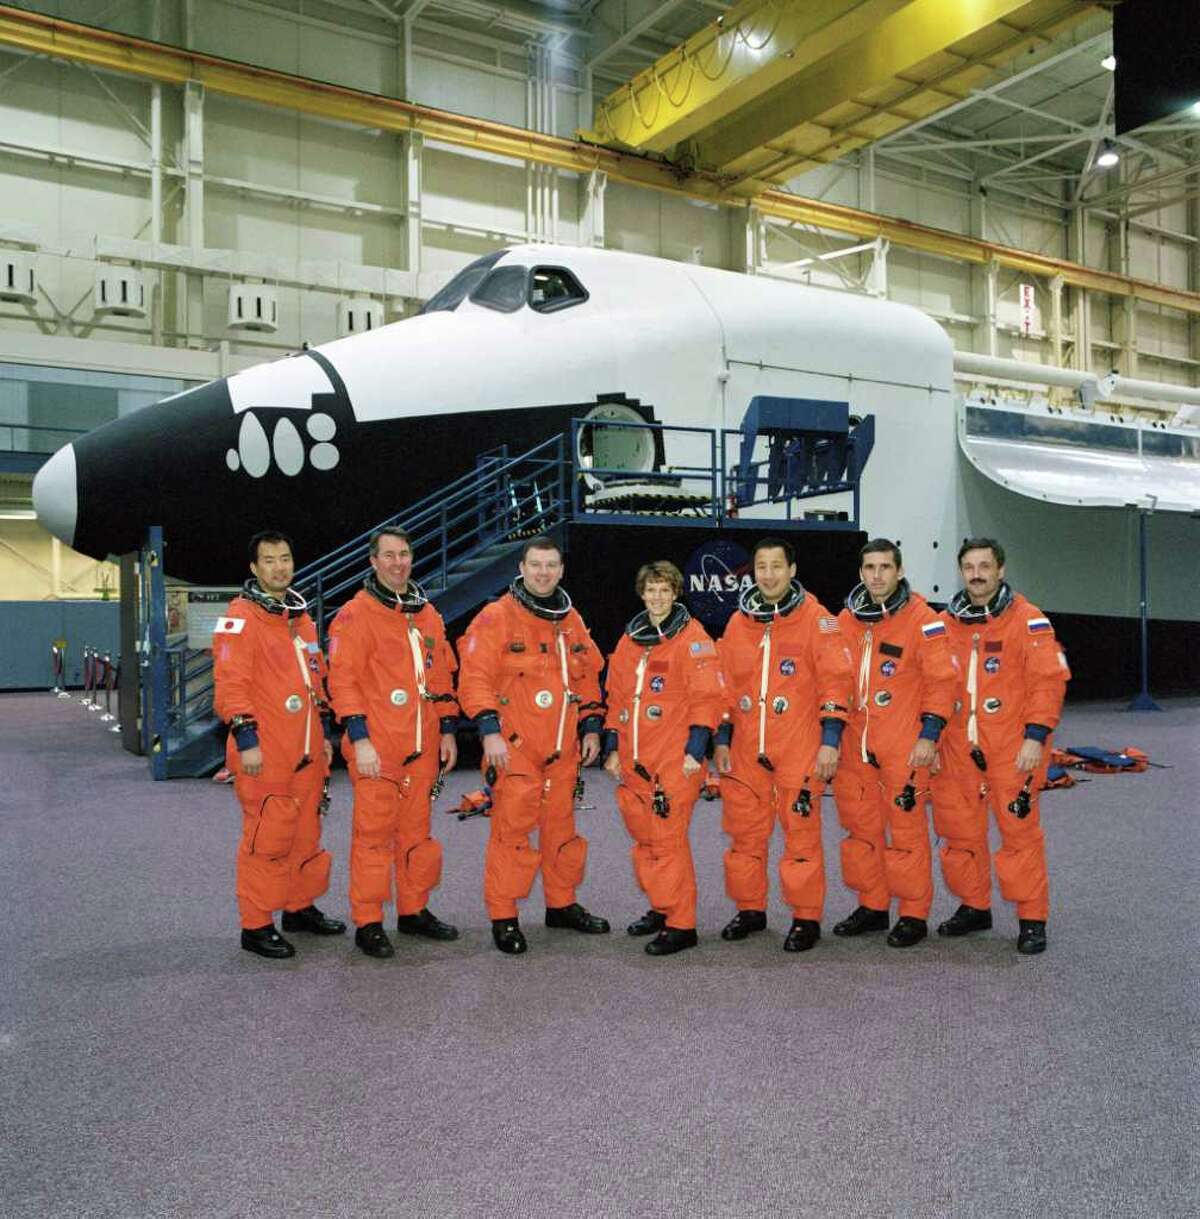 NASA's STS-114 and Expedition Seven crews, attired in training versions of the full-pressure launch and entry suit, pose for a group photo in front of the full-fuselage trainer prior to a training session on Nov. 12, 2002 in the Space Vehicle Mockup Facility at the Johnson Space Center, in Houston. From the left are astronauts Soichi Noguchi, Stephen K. Robinson, both STS-114 mission specialists; James M. Kelly, STS-114 pilot; Eileen M. Collins, STS-114 mission commander; Edward T. Lu, Expedition Seven flight engineer; cosmonauts Yuri I. Malenchenko, Expedition Seven mission commander; and Alexander Y. Kaleri, Expedition Seven flight engineer. Noguchi represents Japan's National Space Development Agency. Malenchenko and Kaleri represent Rosaviakosmos.